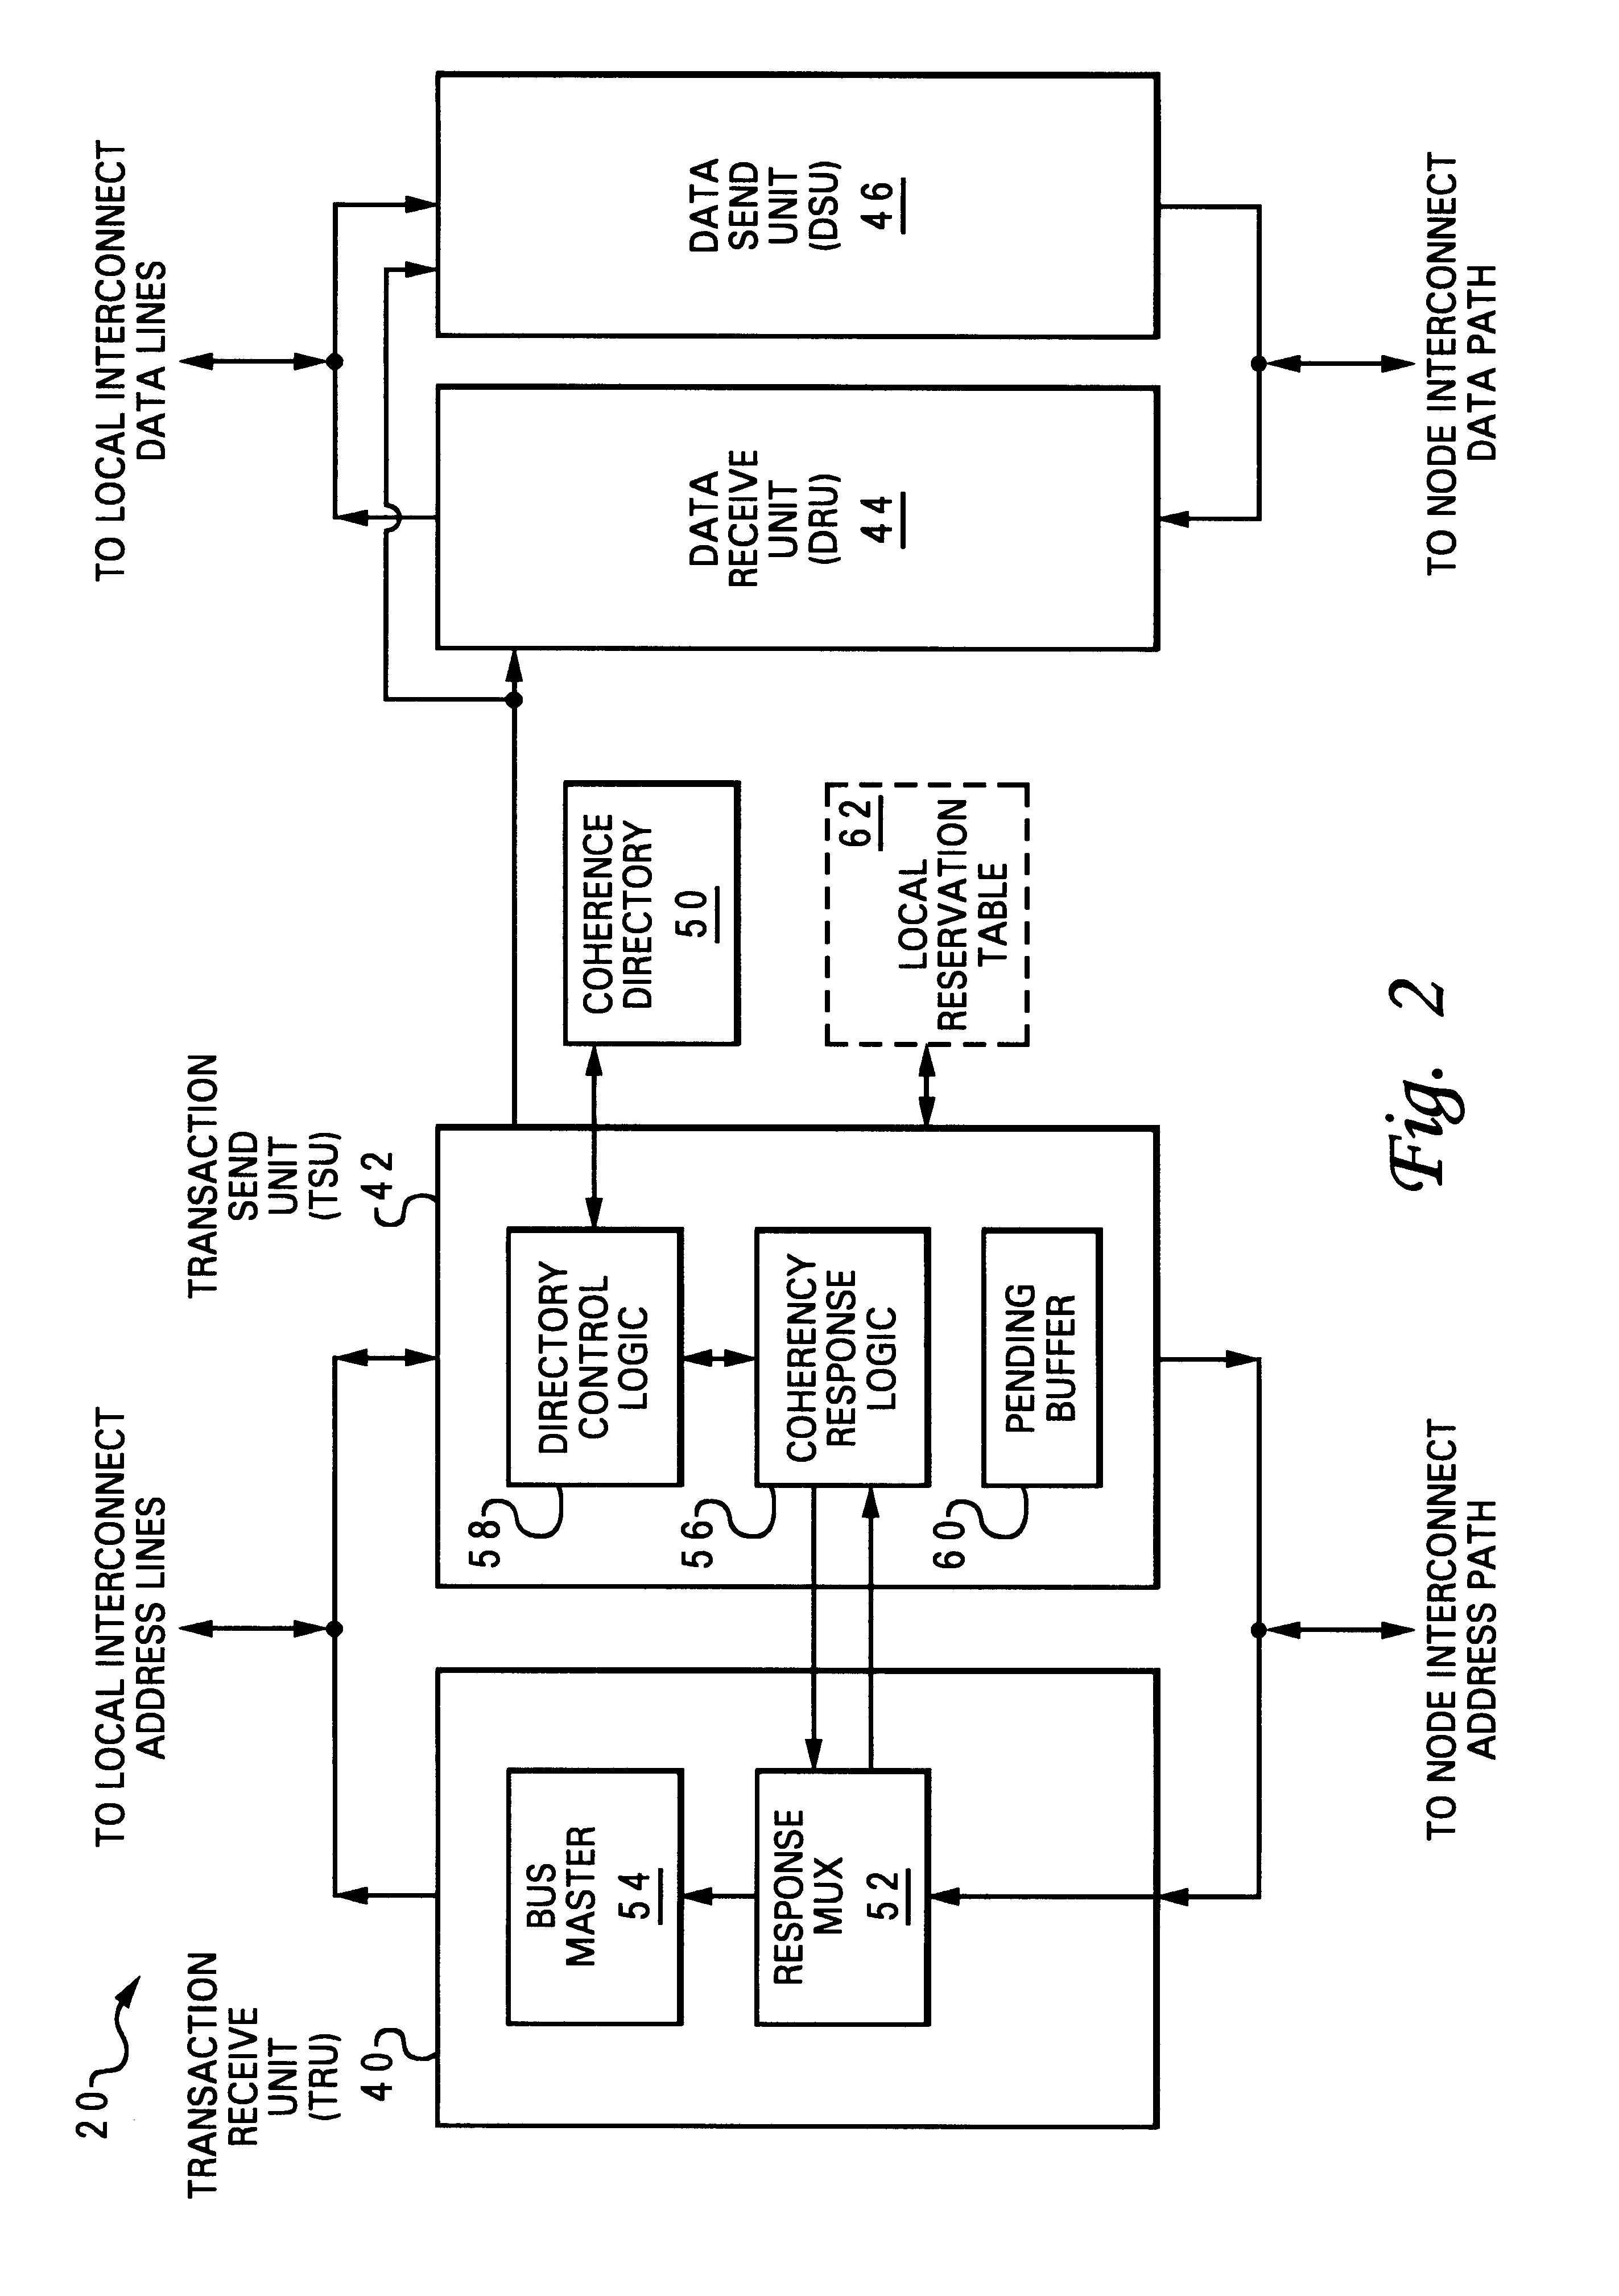 Reservation management in a non-uniform memory access (NUMA) data processing system